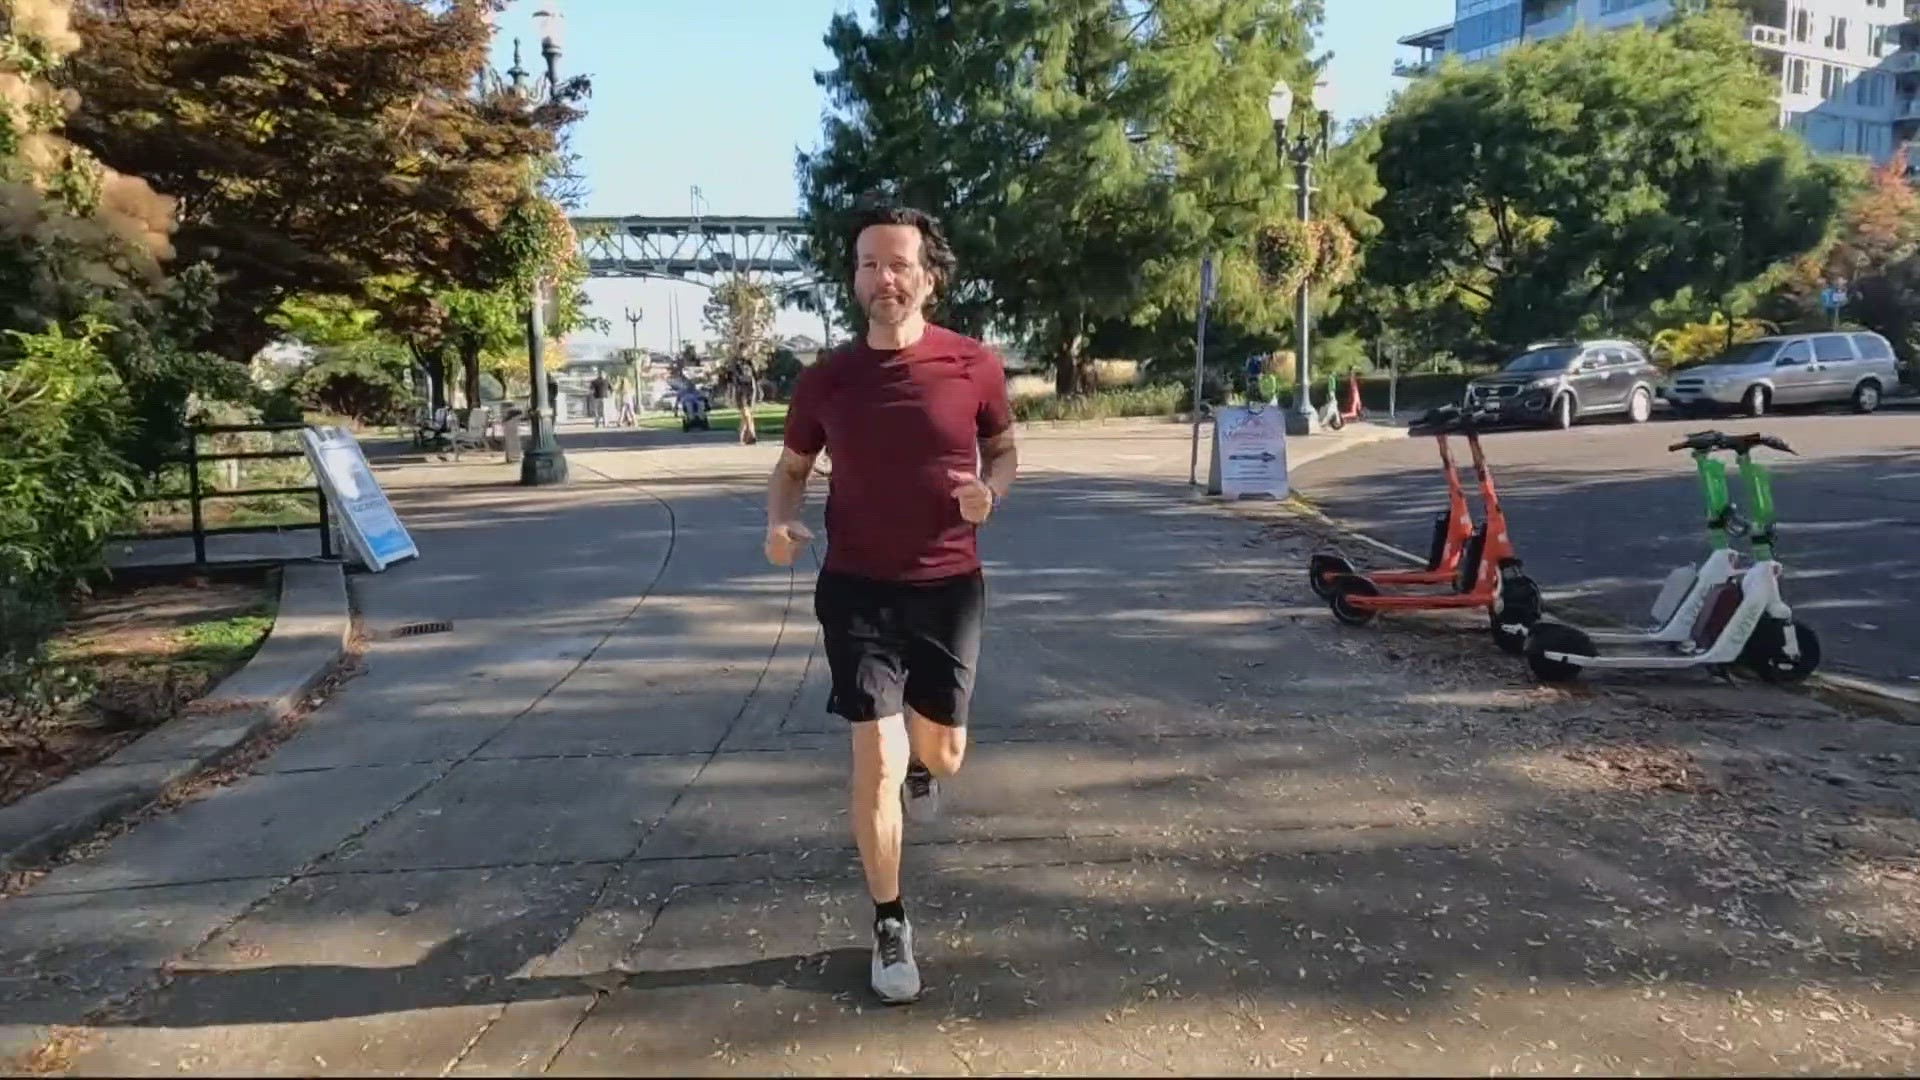 OHSU is the first in the national to use a leading-edge knee repair technique to treat osteoarthritis in the knee, so Thomas Proctor is hitting the pavement again.